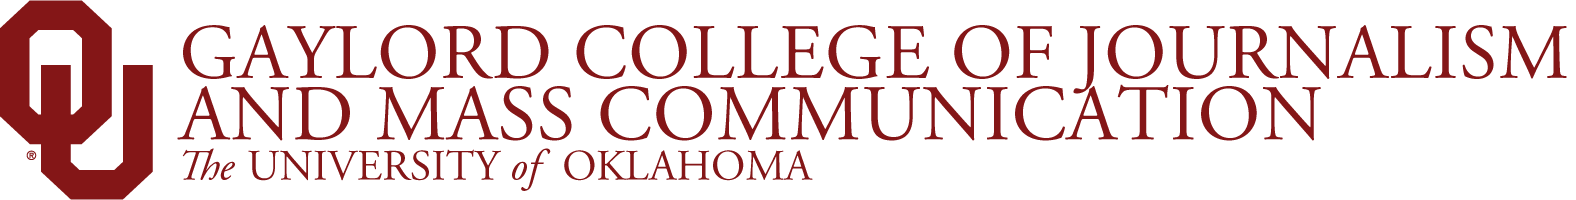 Gaylord College of Journalism and Mass Communication, The University of Oklahoma website wordmark